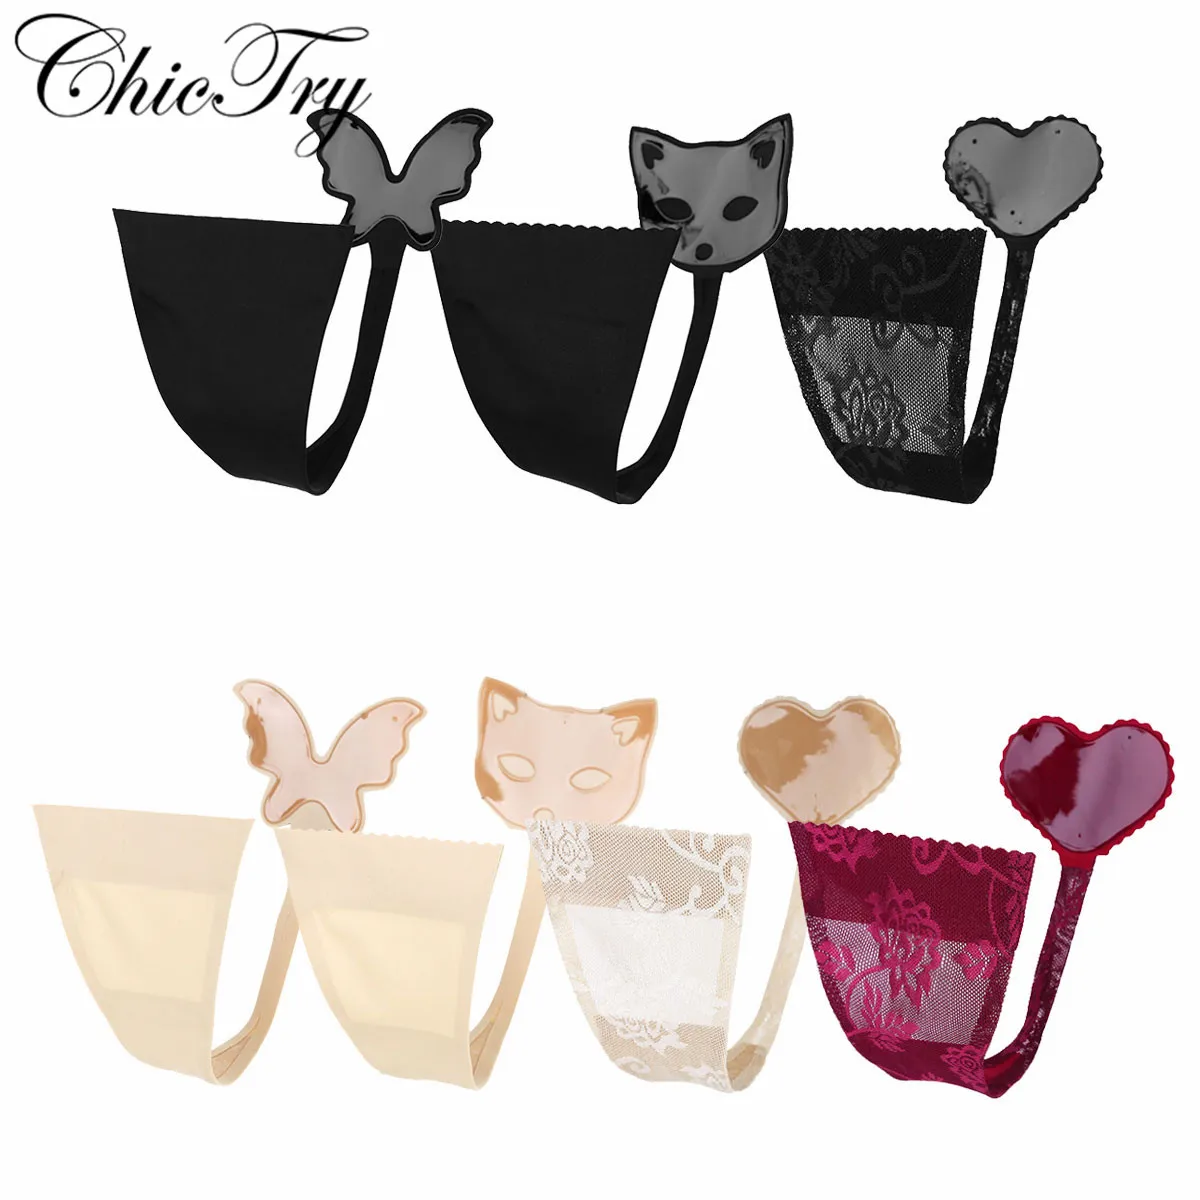 ChicTry Women Lady Thong C-string Sexy Panties C Style Invisible No Panty Line Self Adhesive Strapless Thong Lingerie Underwear